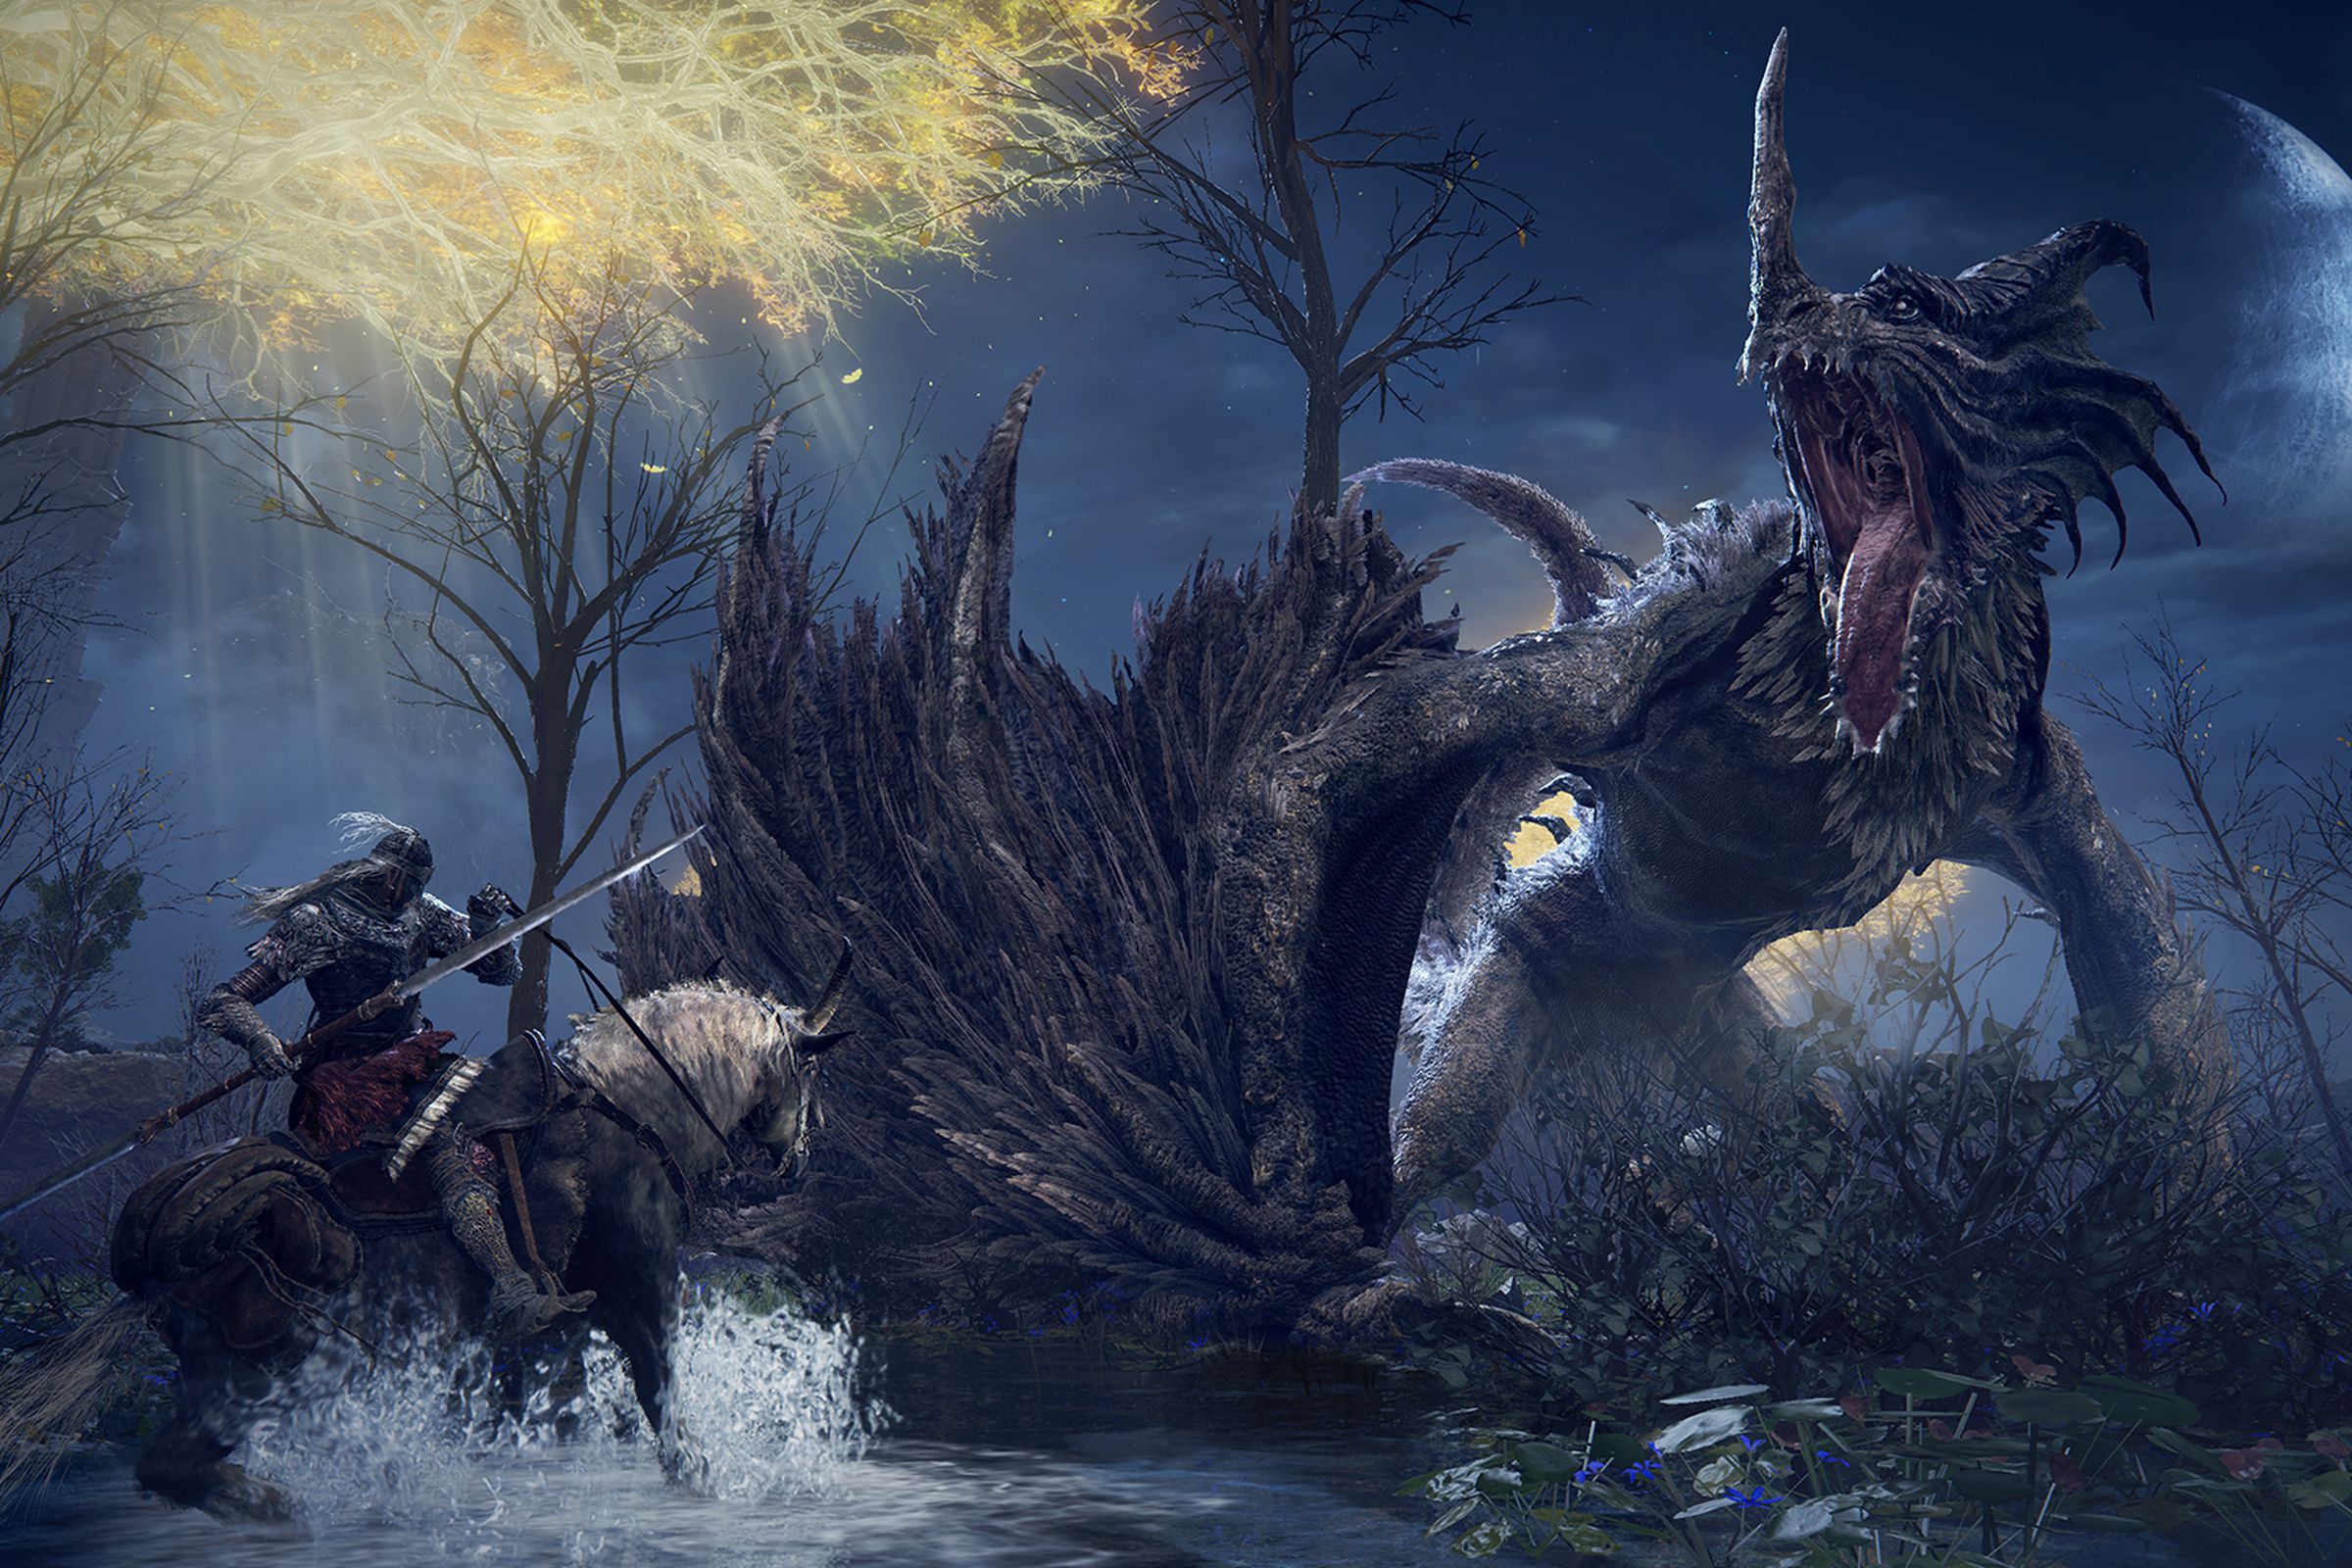 Screenshot pf a character fighting a beast from the Elden Ring game.